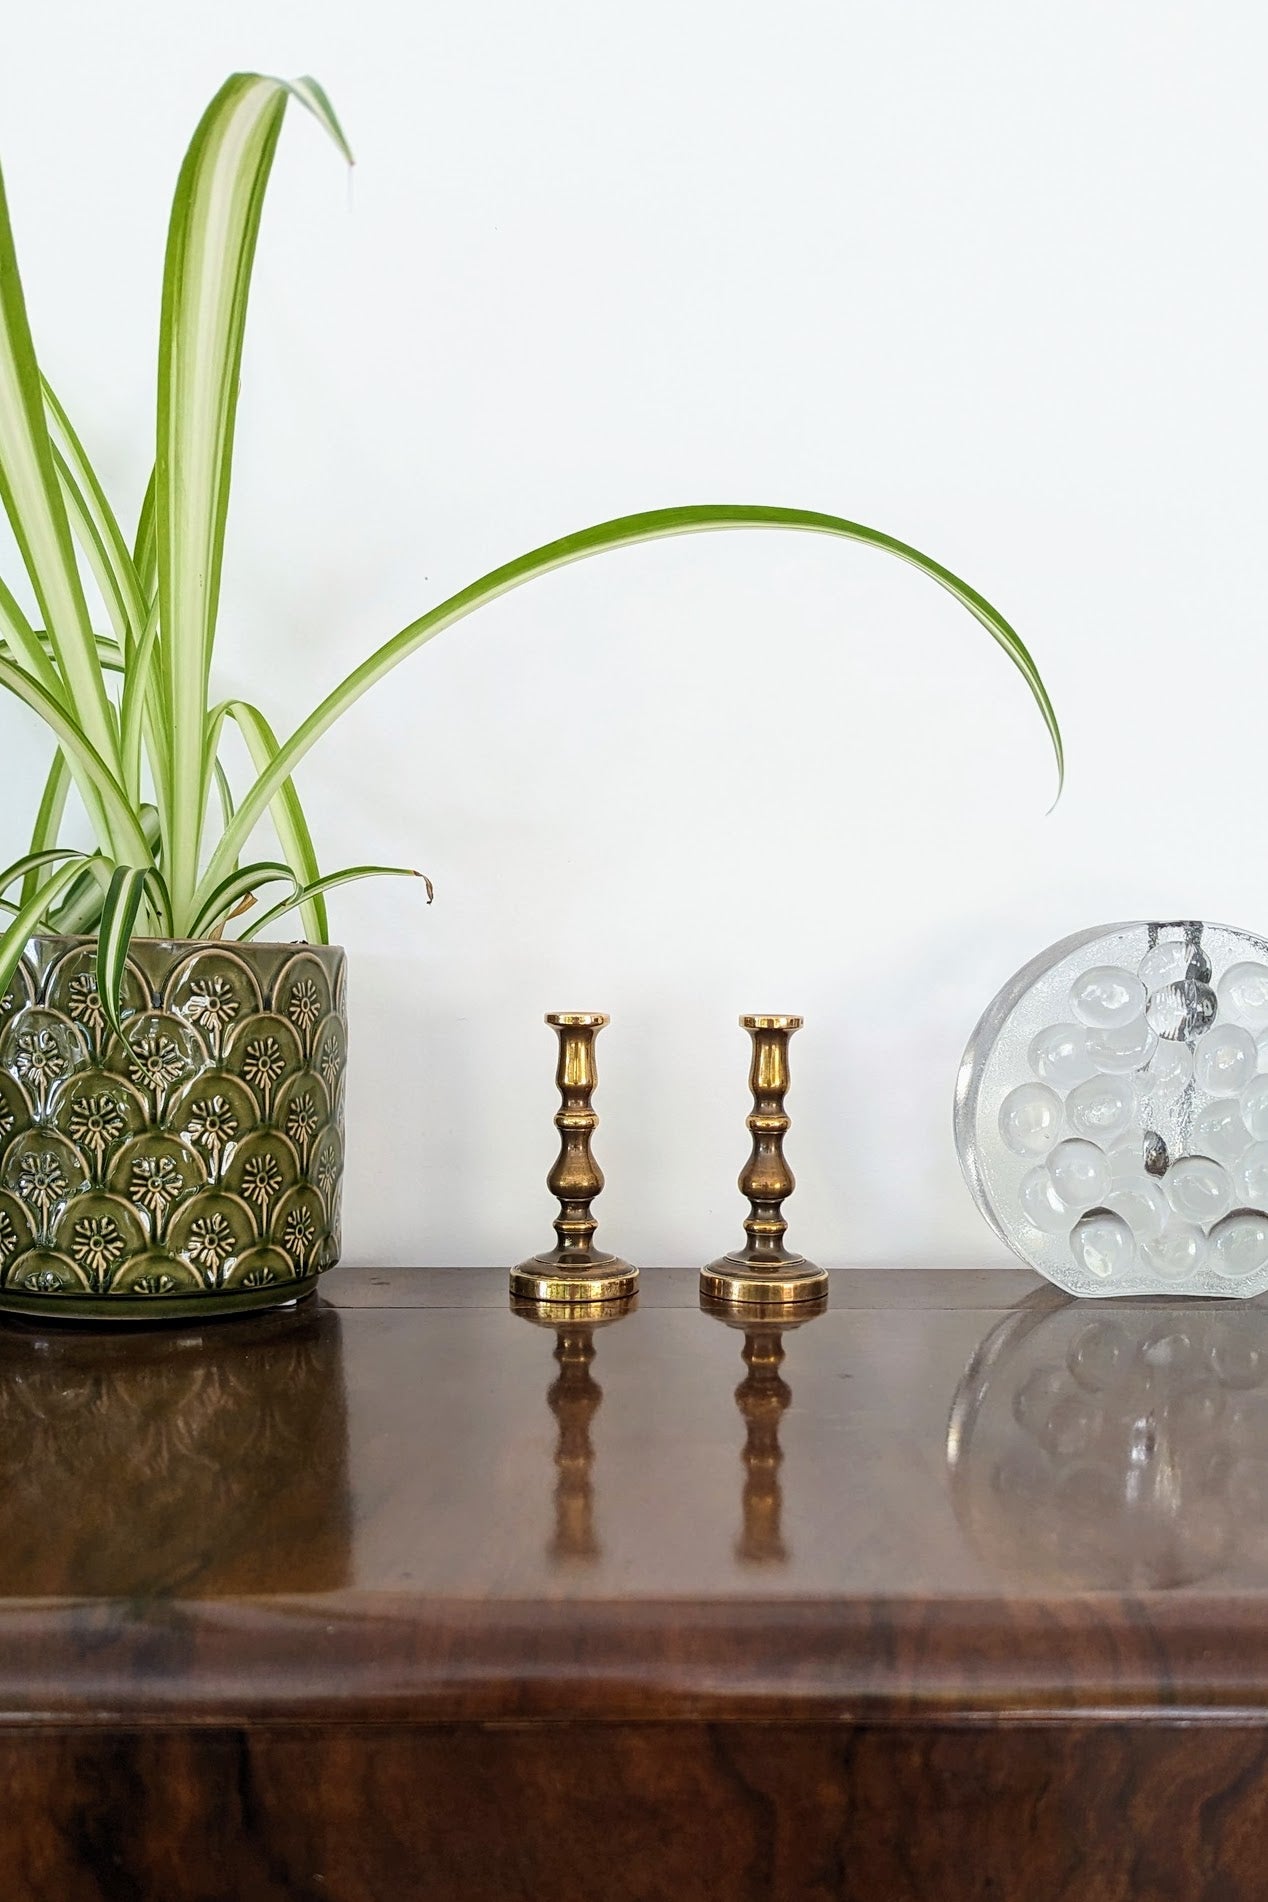 Small Pair of Vintage Brass Candlestick Holders